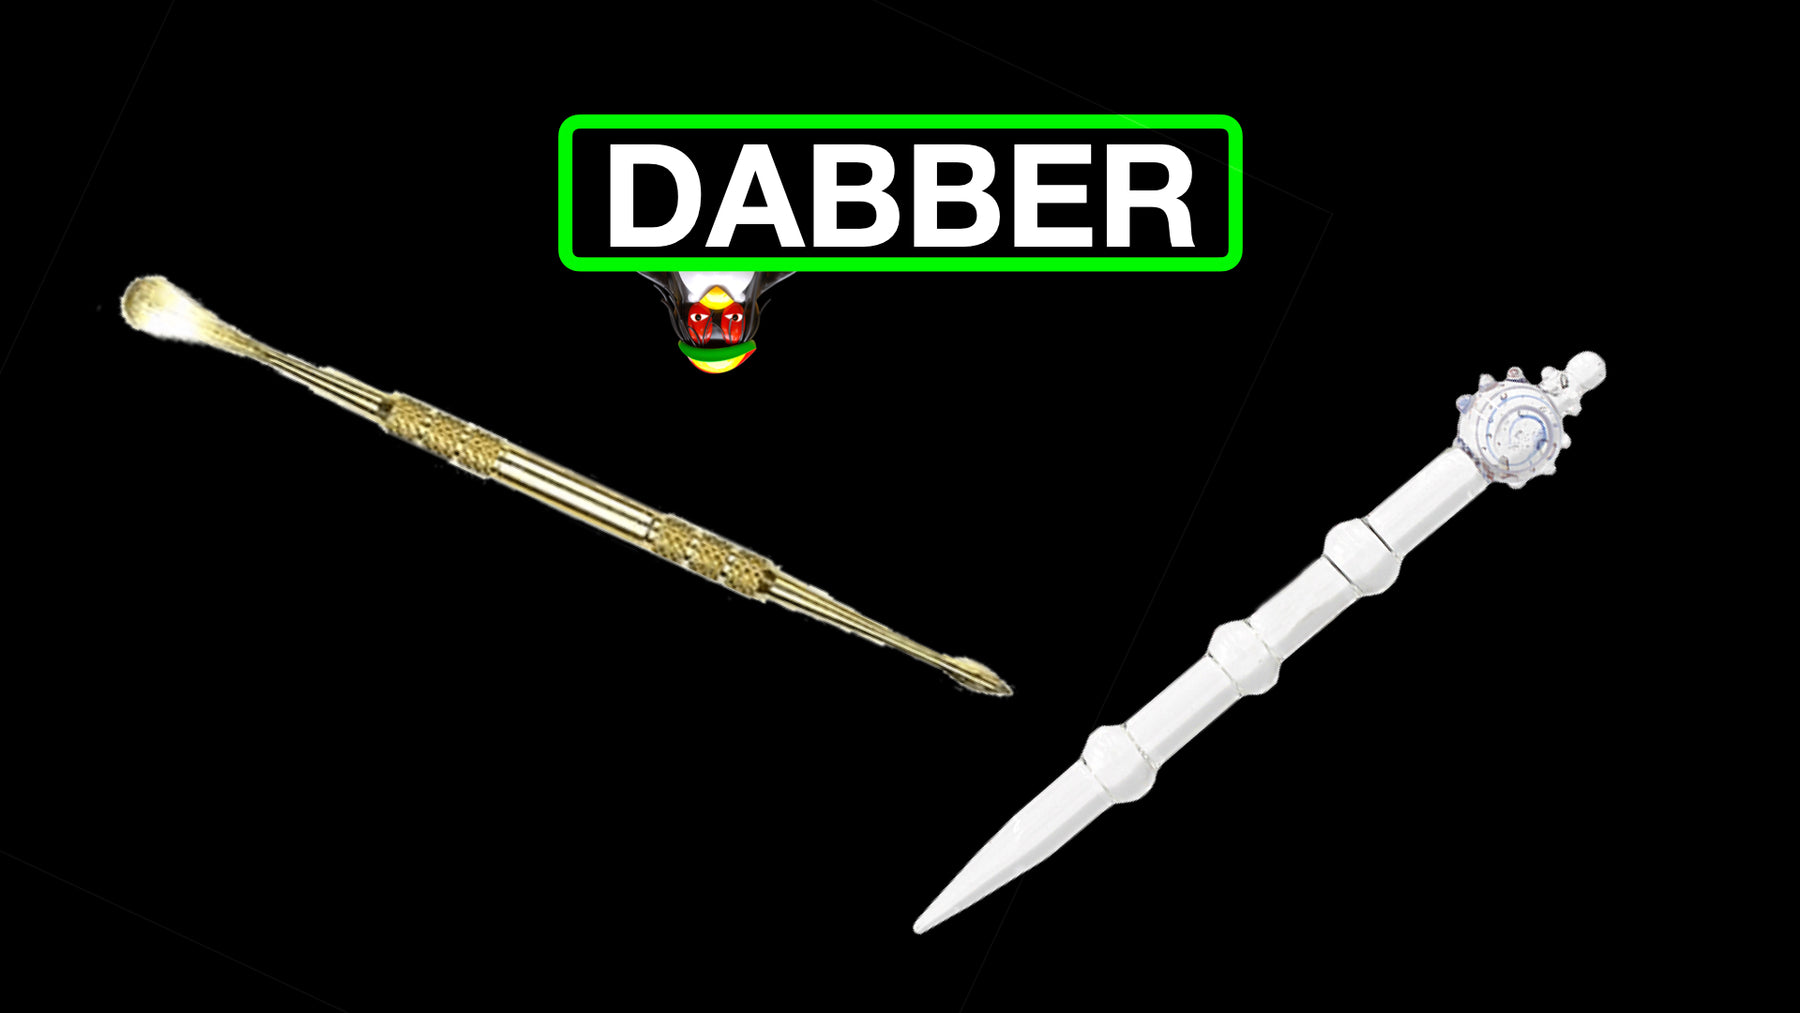 Terminology Blog. What is a dabber and how is it used?